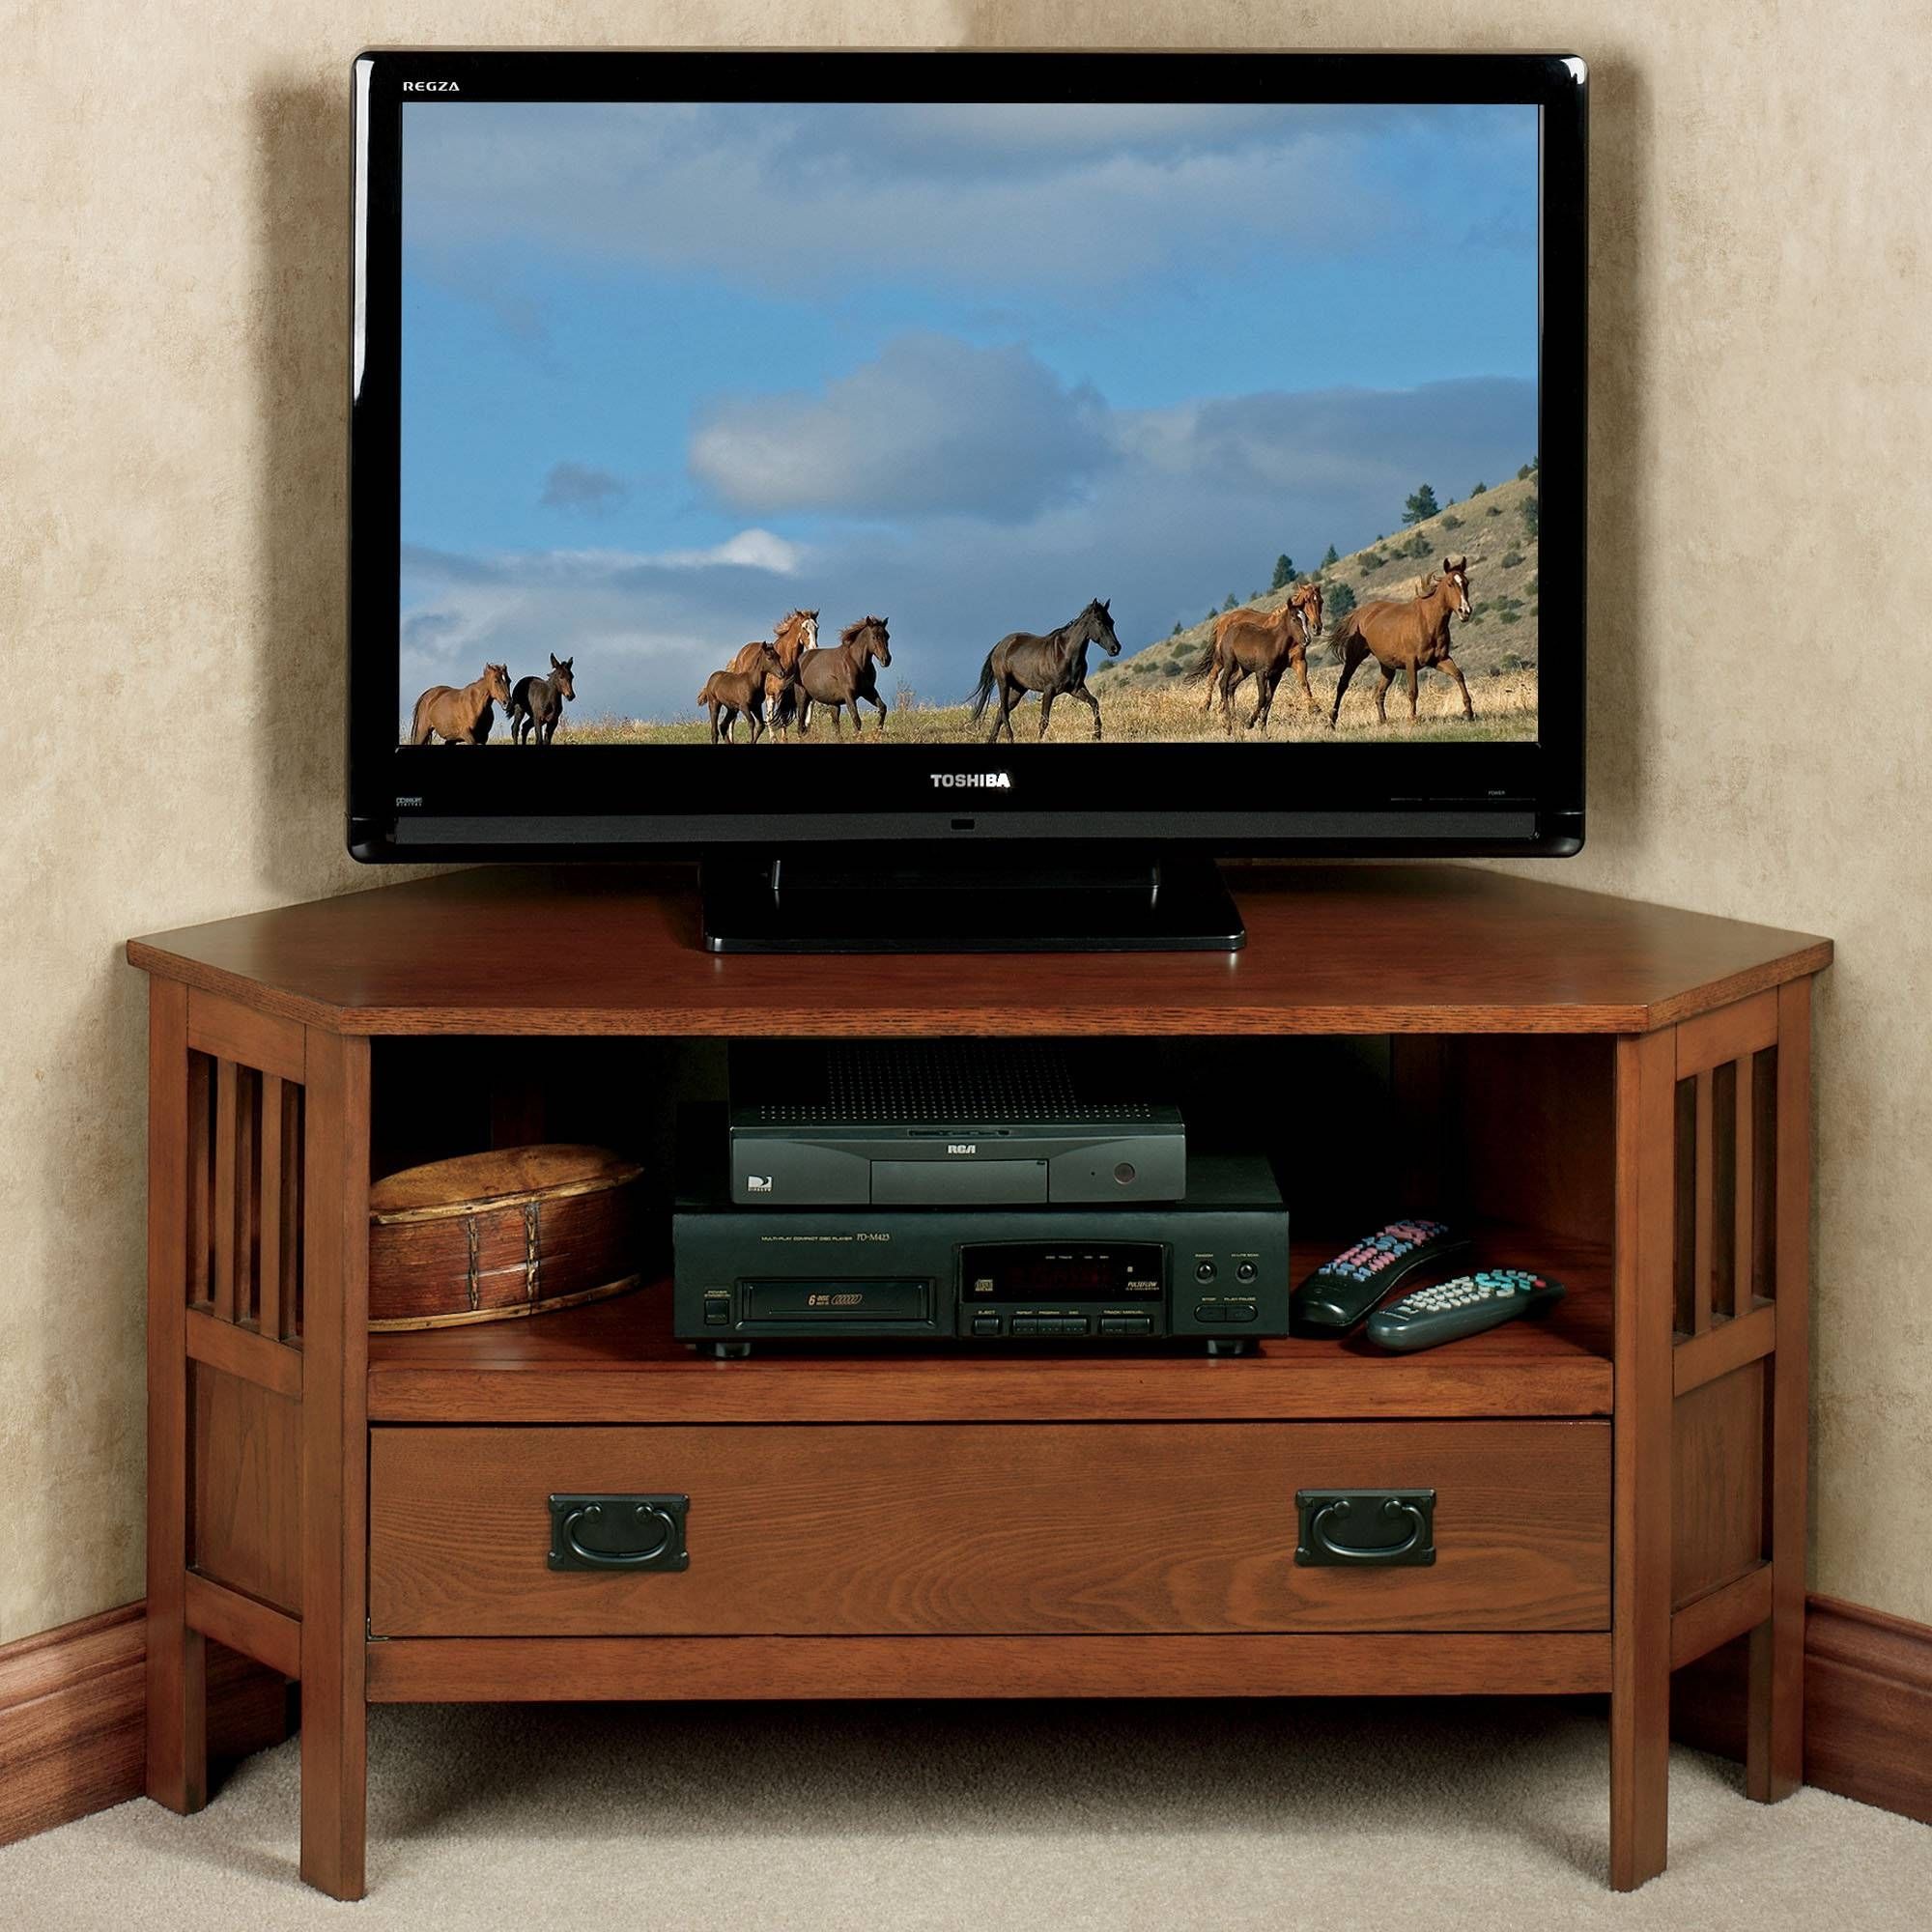 Dining Room: Adorable Brown Great Costco Tv Console For Luxury Throughout Denver Tv Stands (View 9 of 15)